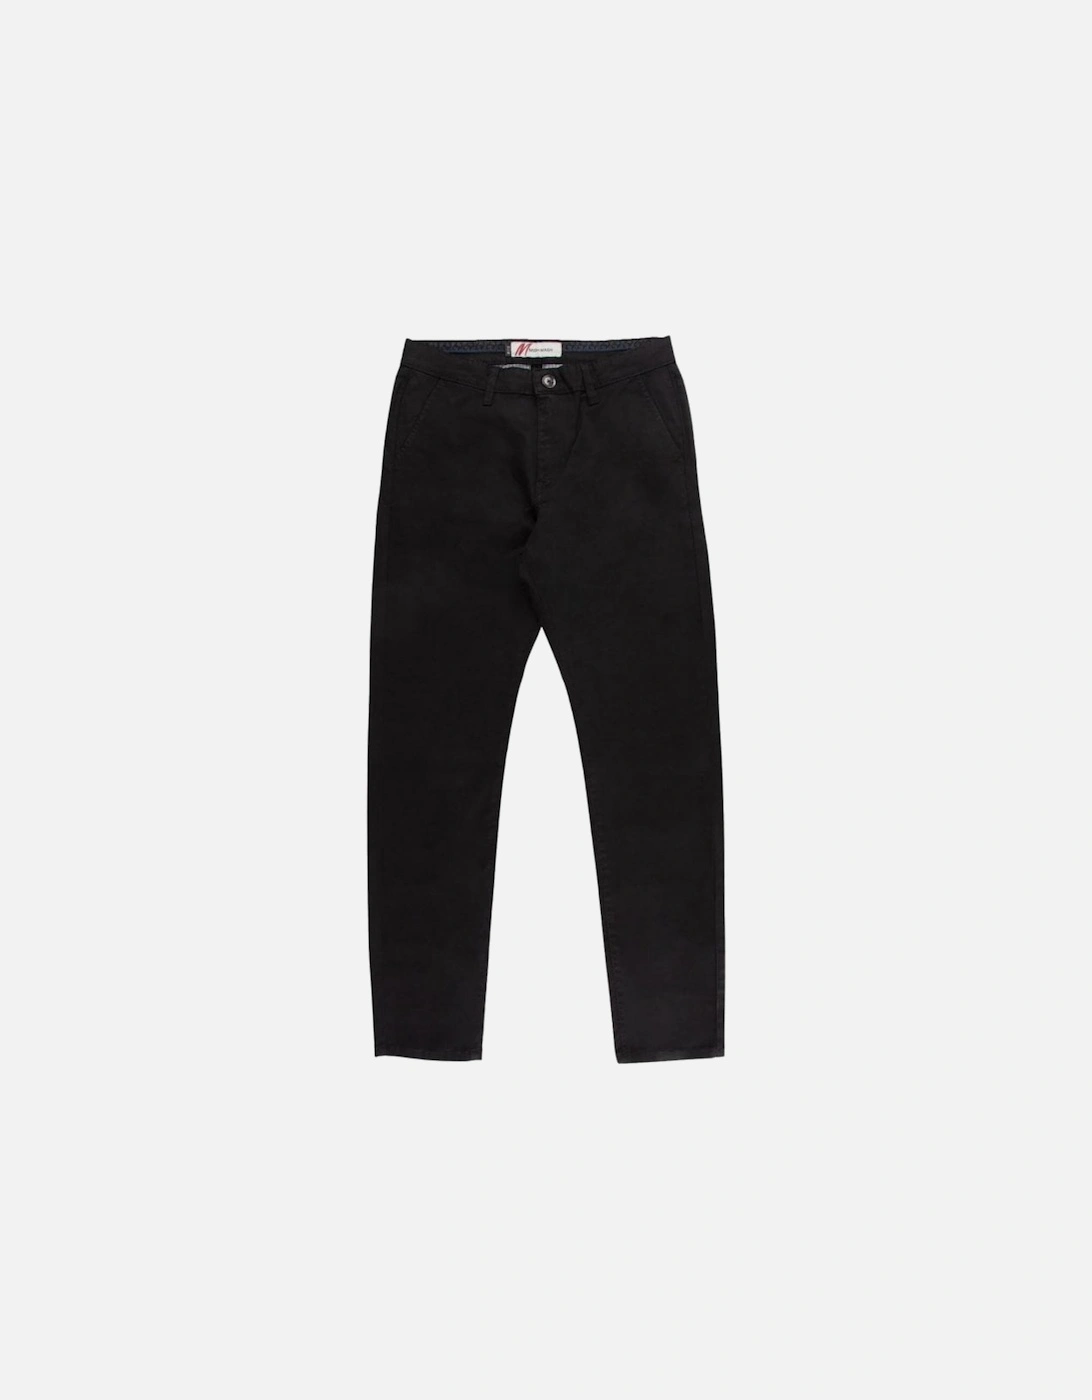 Bromley casual 4 pocket tapered chino - Black, 3 of 2